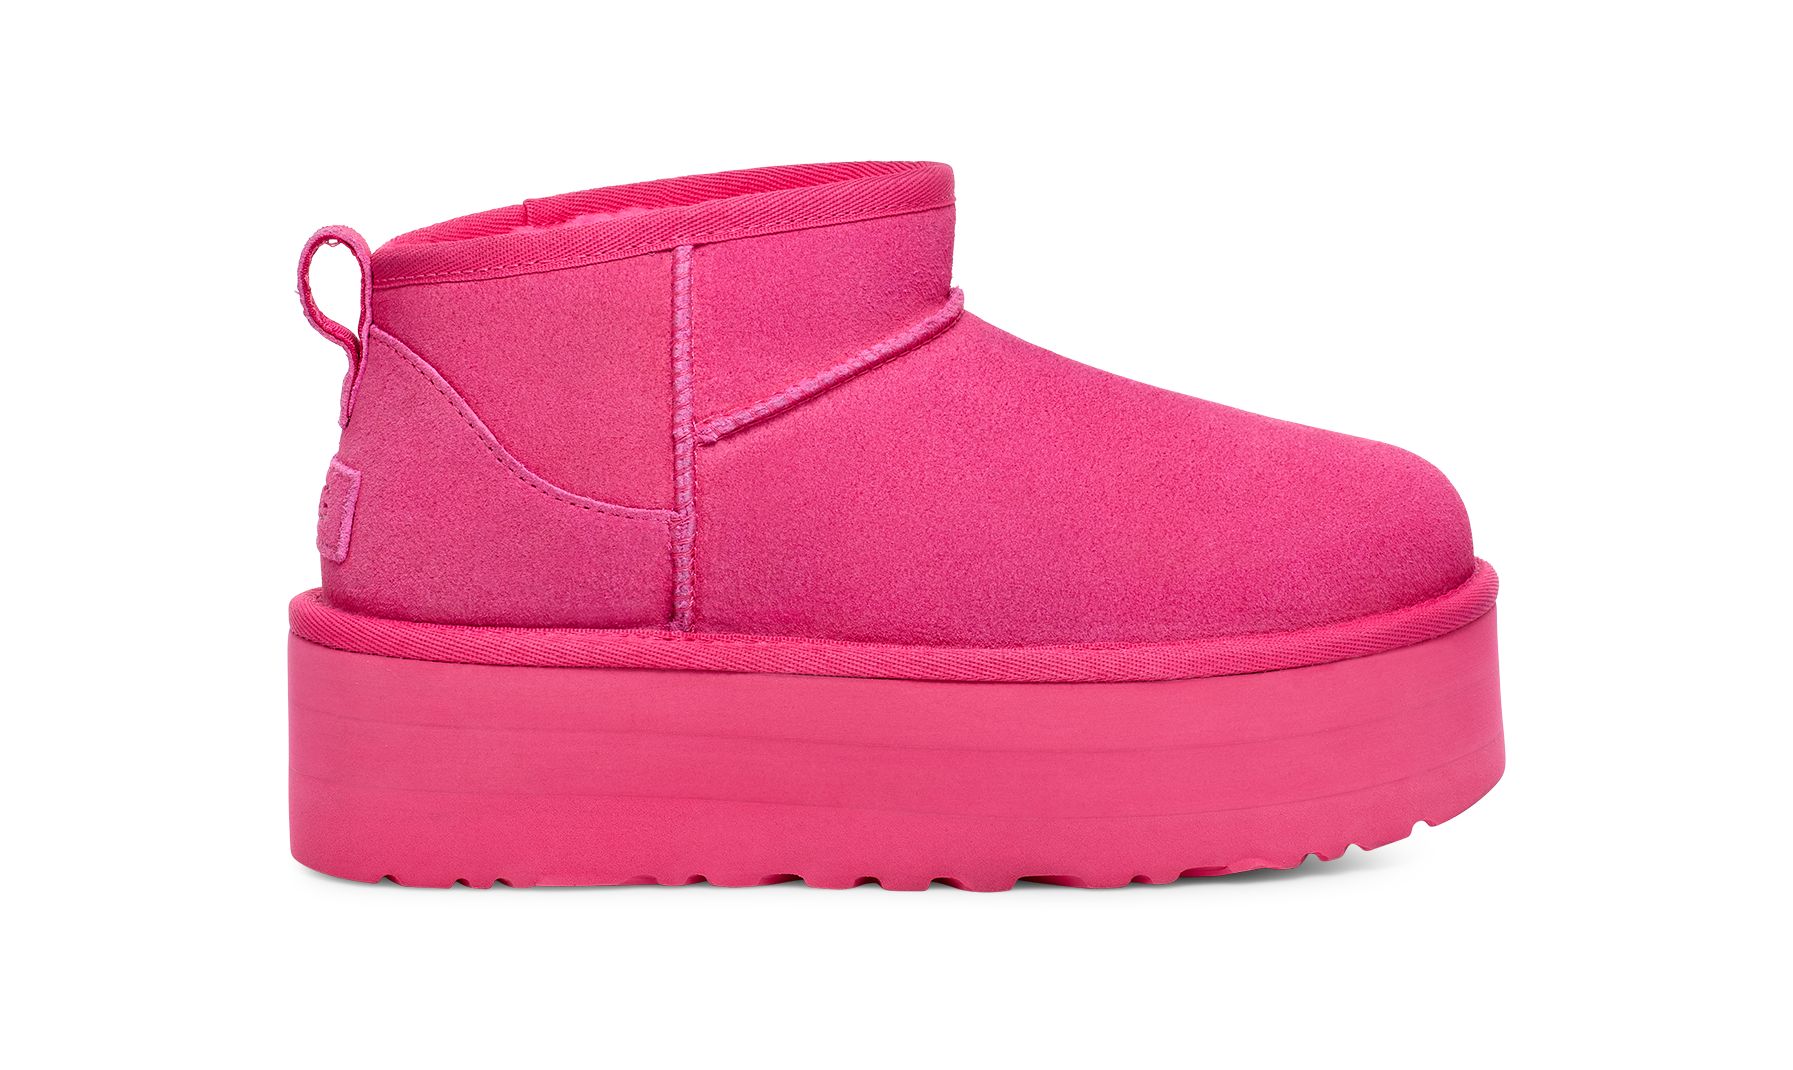 UGG Classic Ultra Mini Platform Suede Classic Boots in Taffy Pink, Size W 11/M 10 | UGG (US)